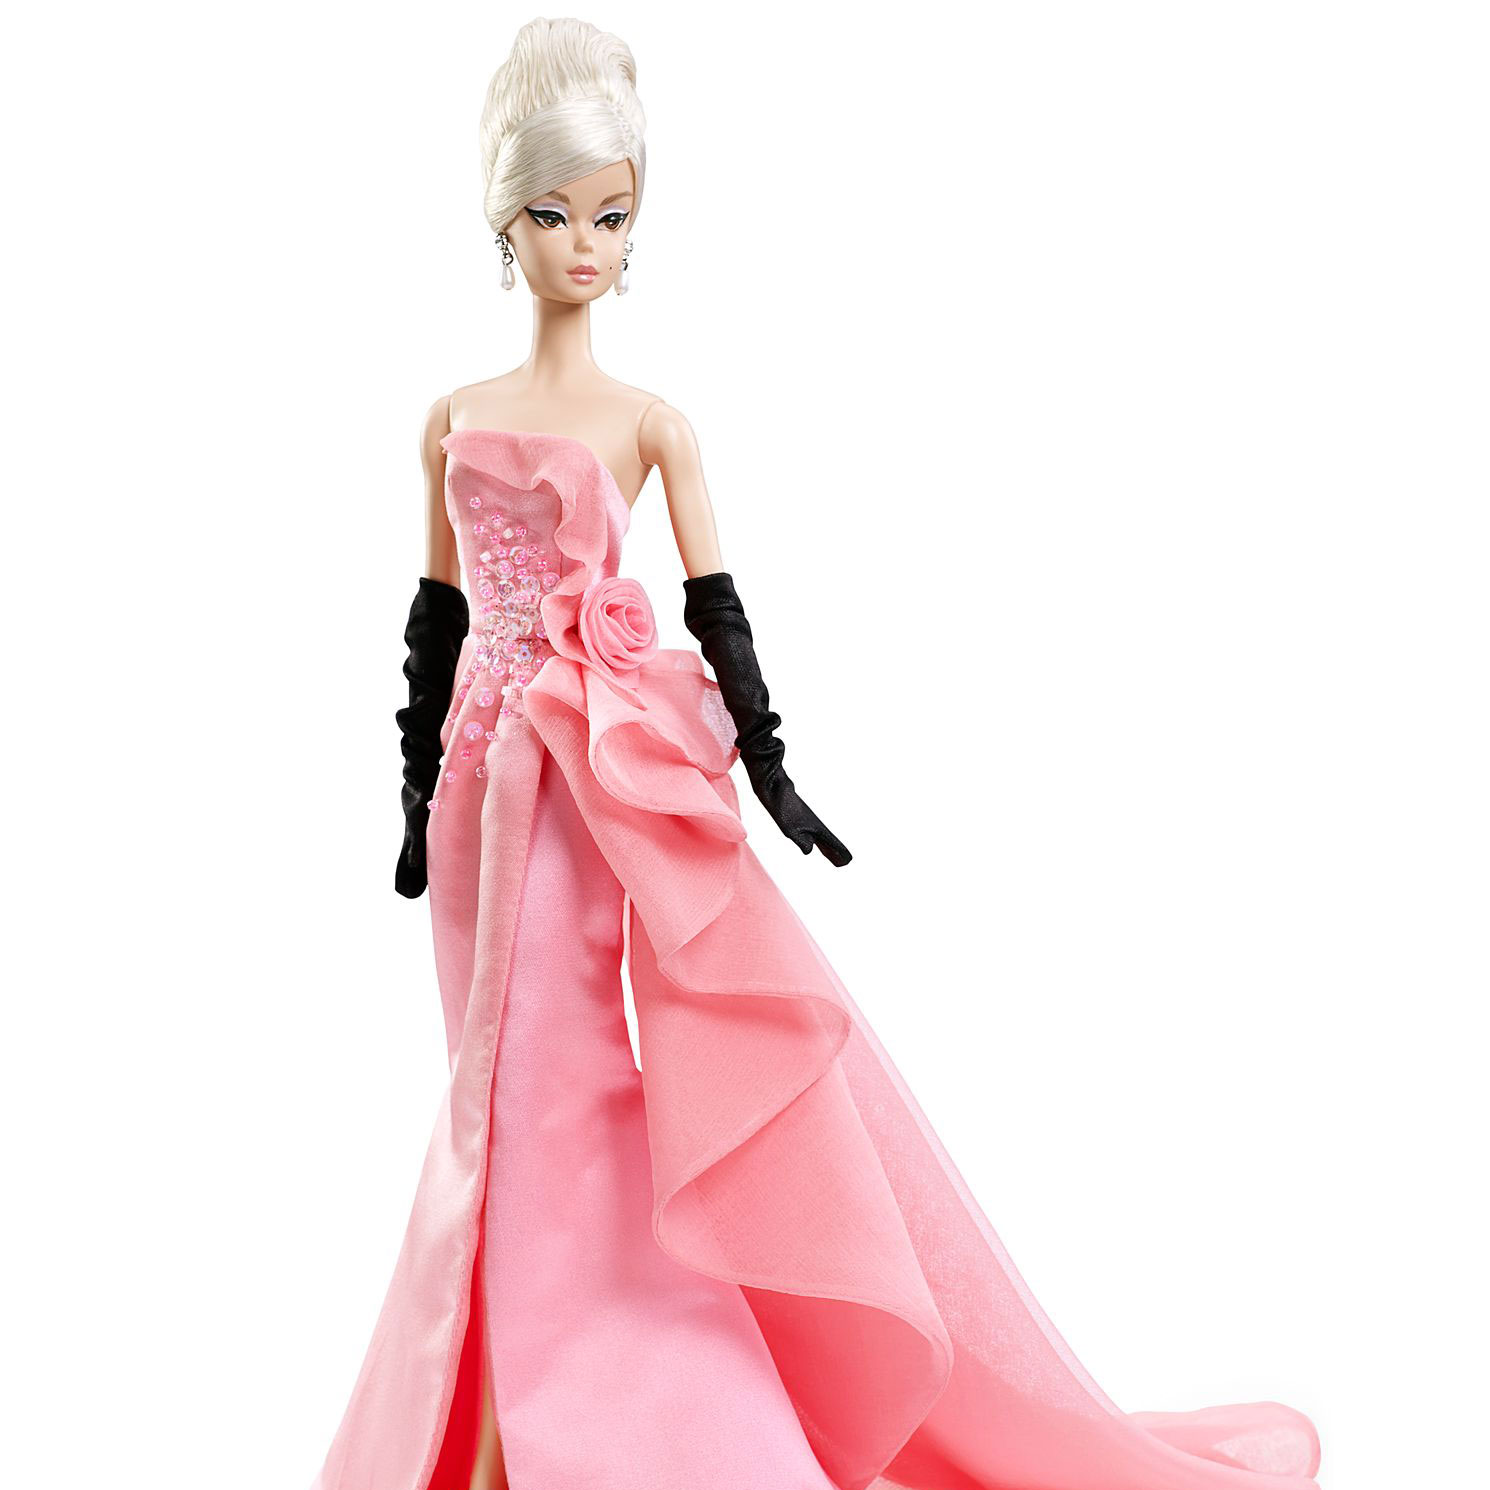 Glam Gown Barbie Doll  Perfectory Barbie Edition